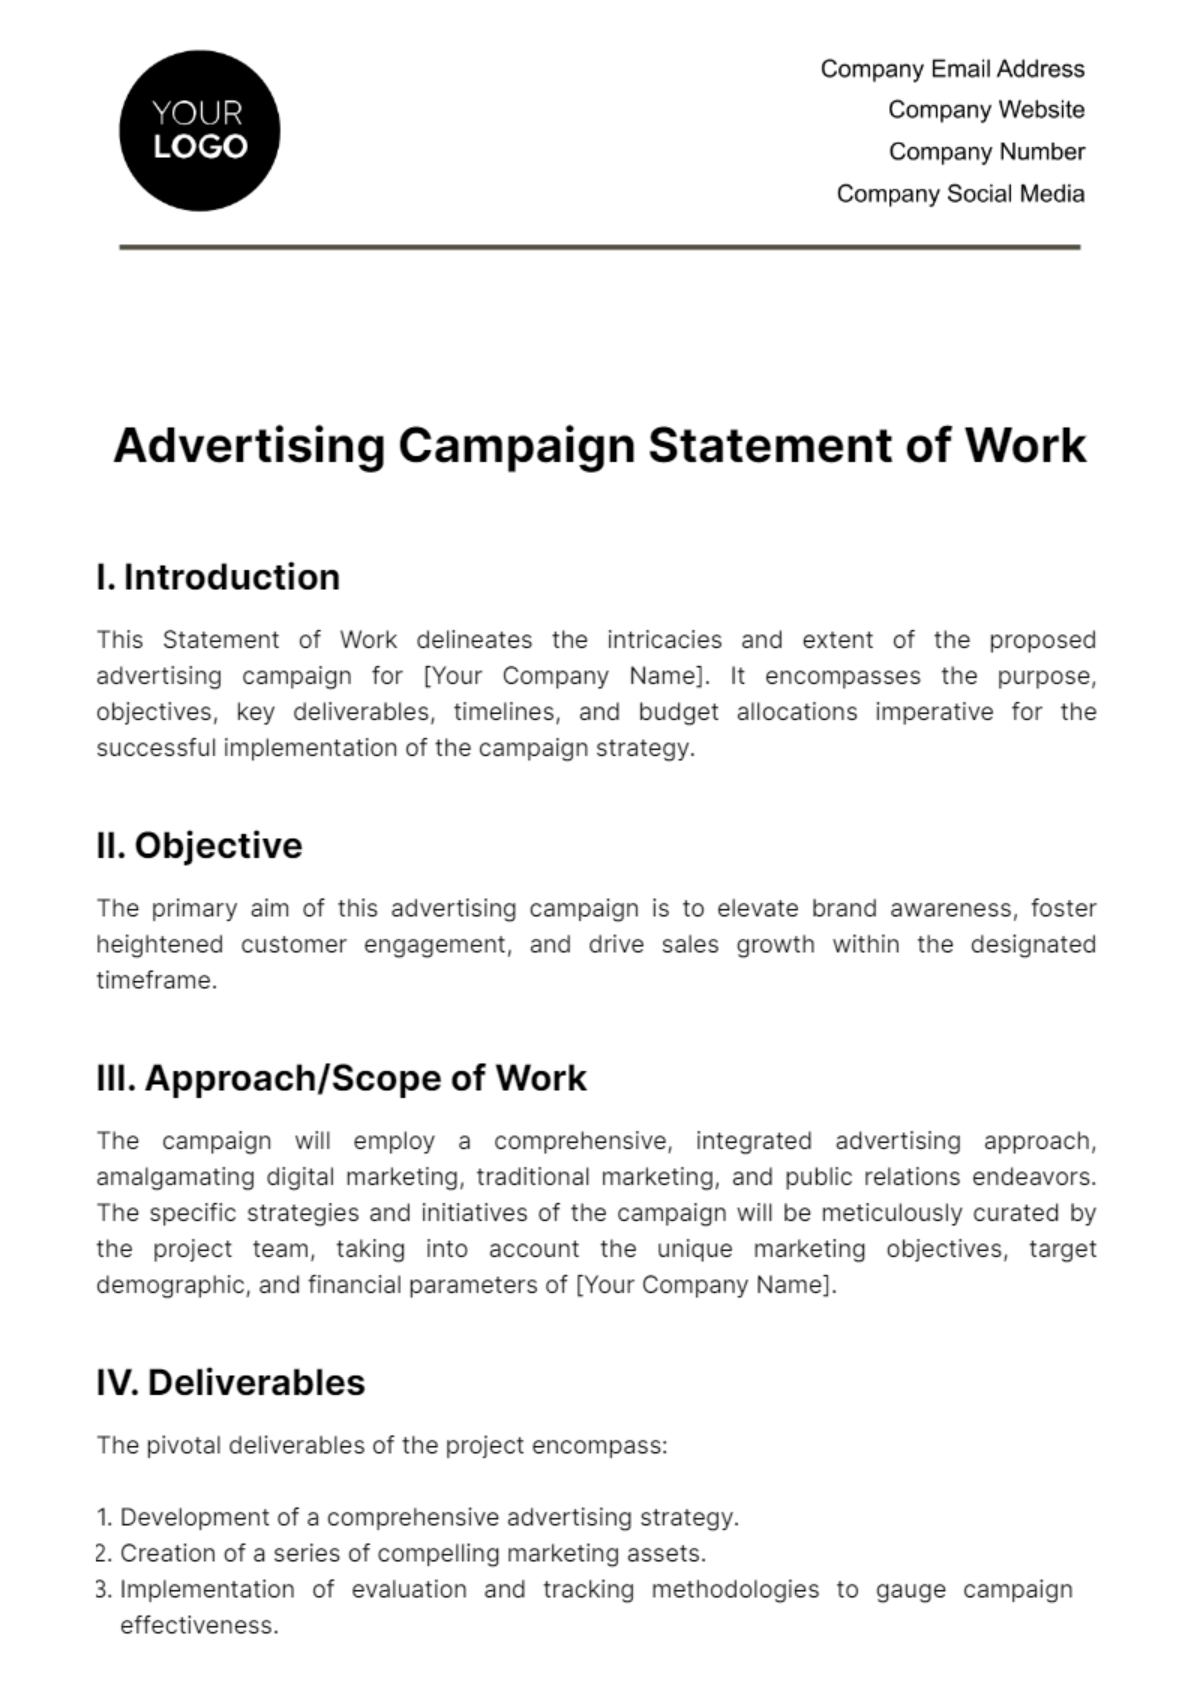 Free Advertising Campaign Statement of Work Template